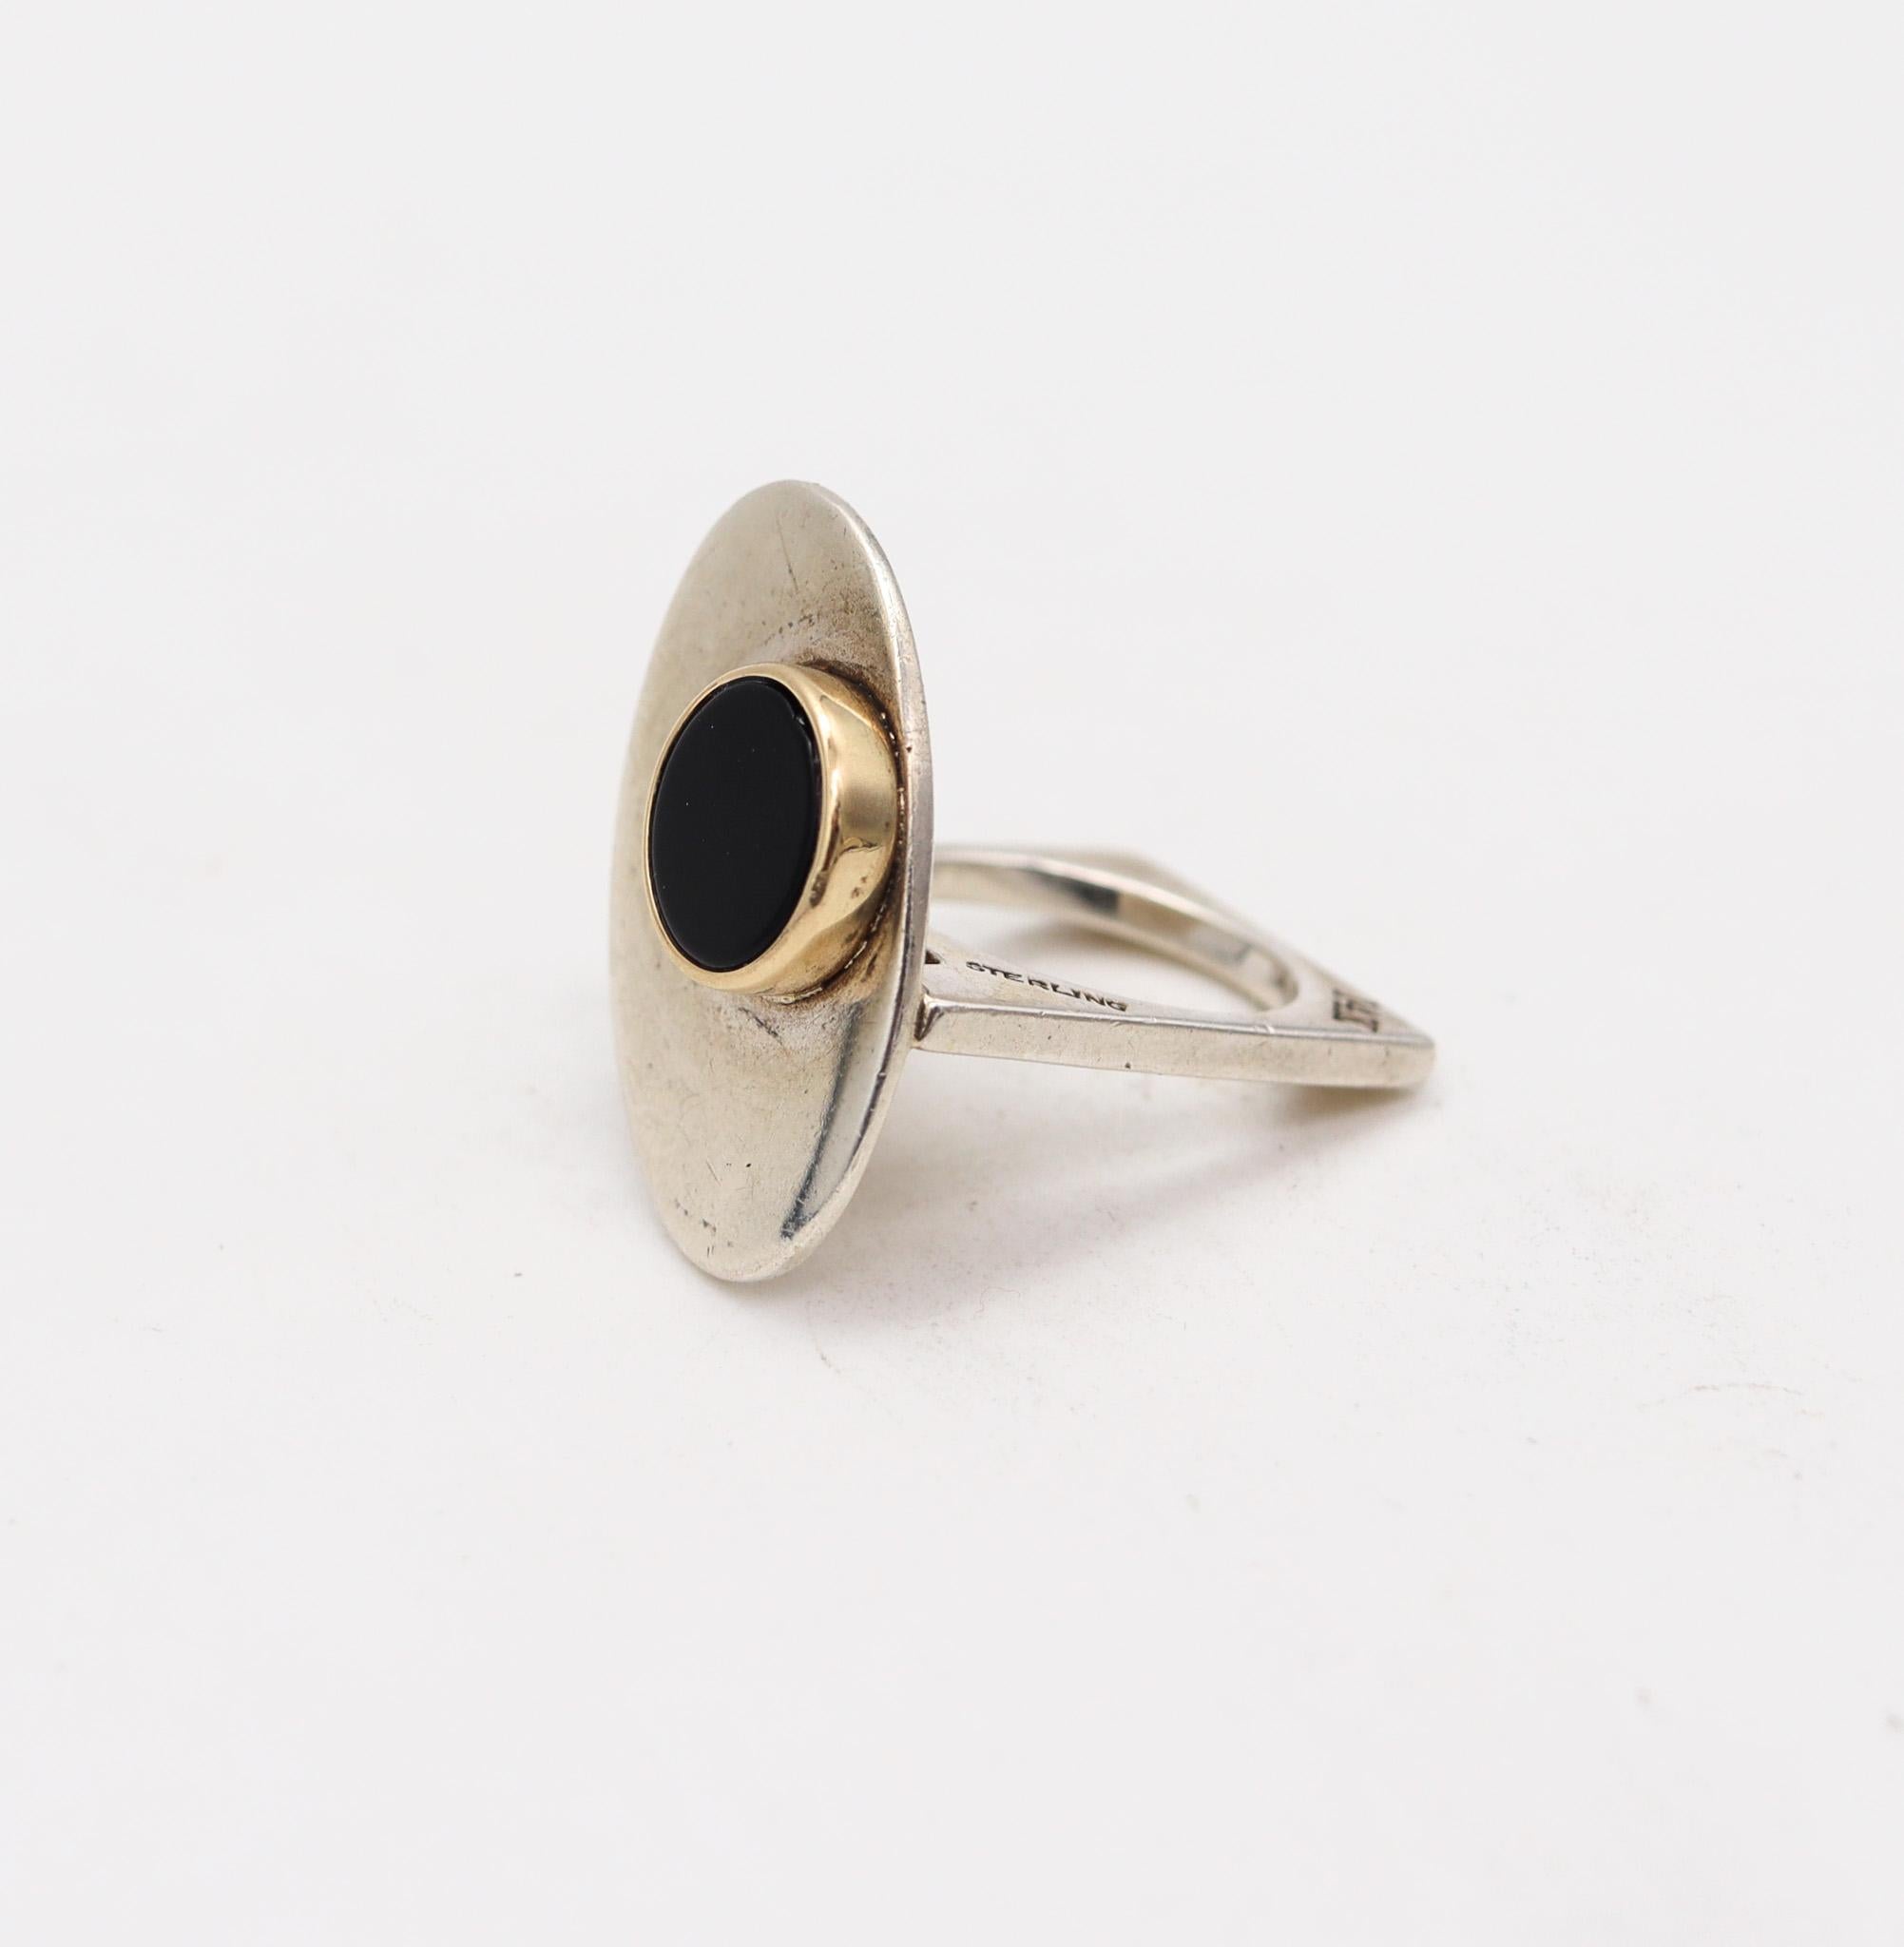 Cabochon Pierre Cardin 1970 Paris Geometric Sculptural Onyx Ring 14kt Gold and Sterling For Sale